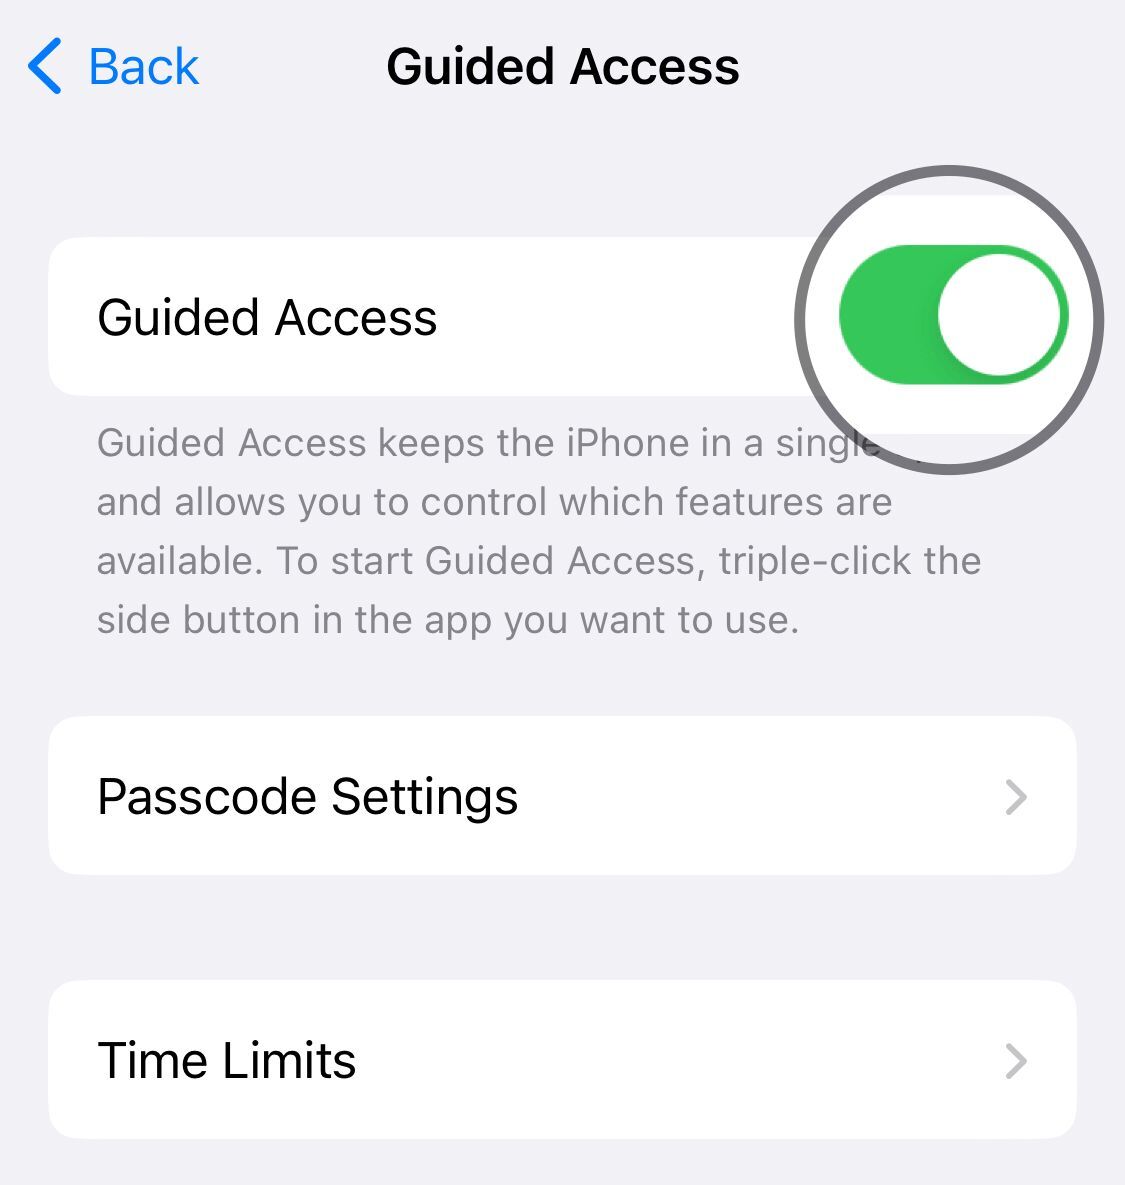 Enable guided access